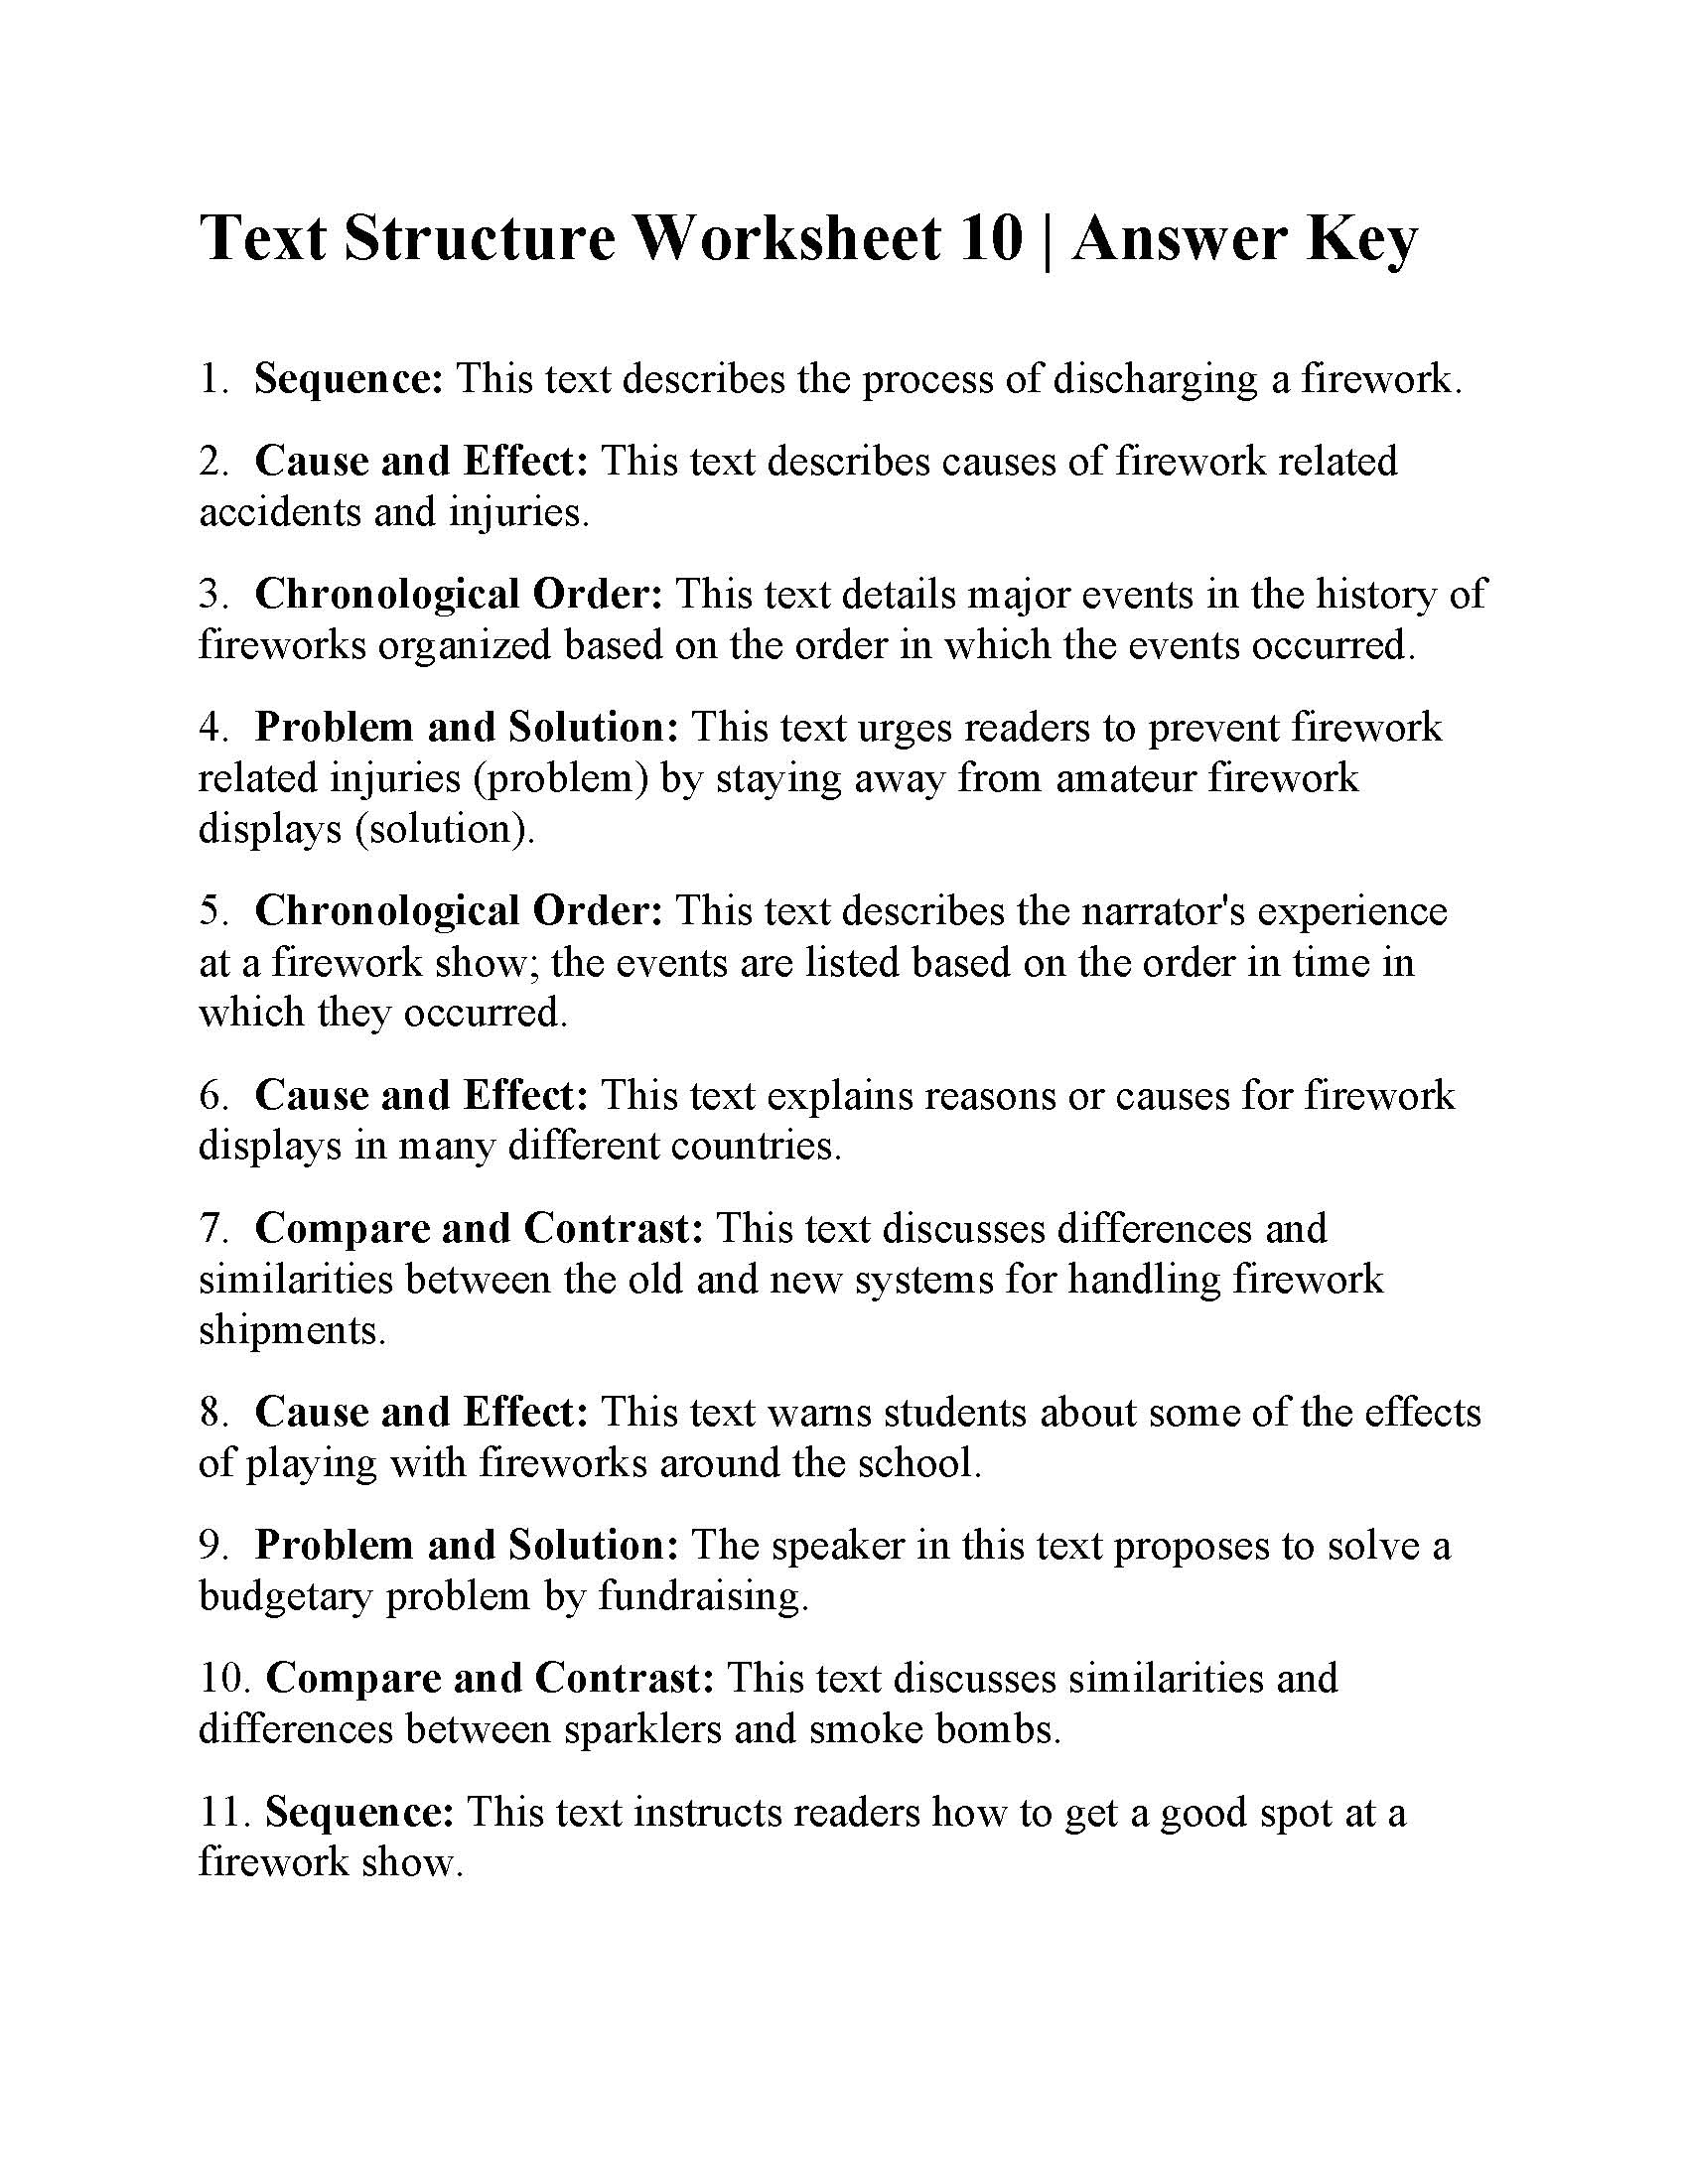 Text Structure Worksheet 21  Answers Intended For Text Structure Worksheet Pdf